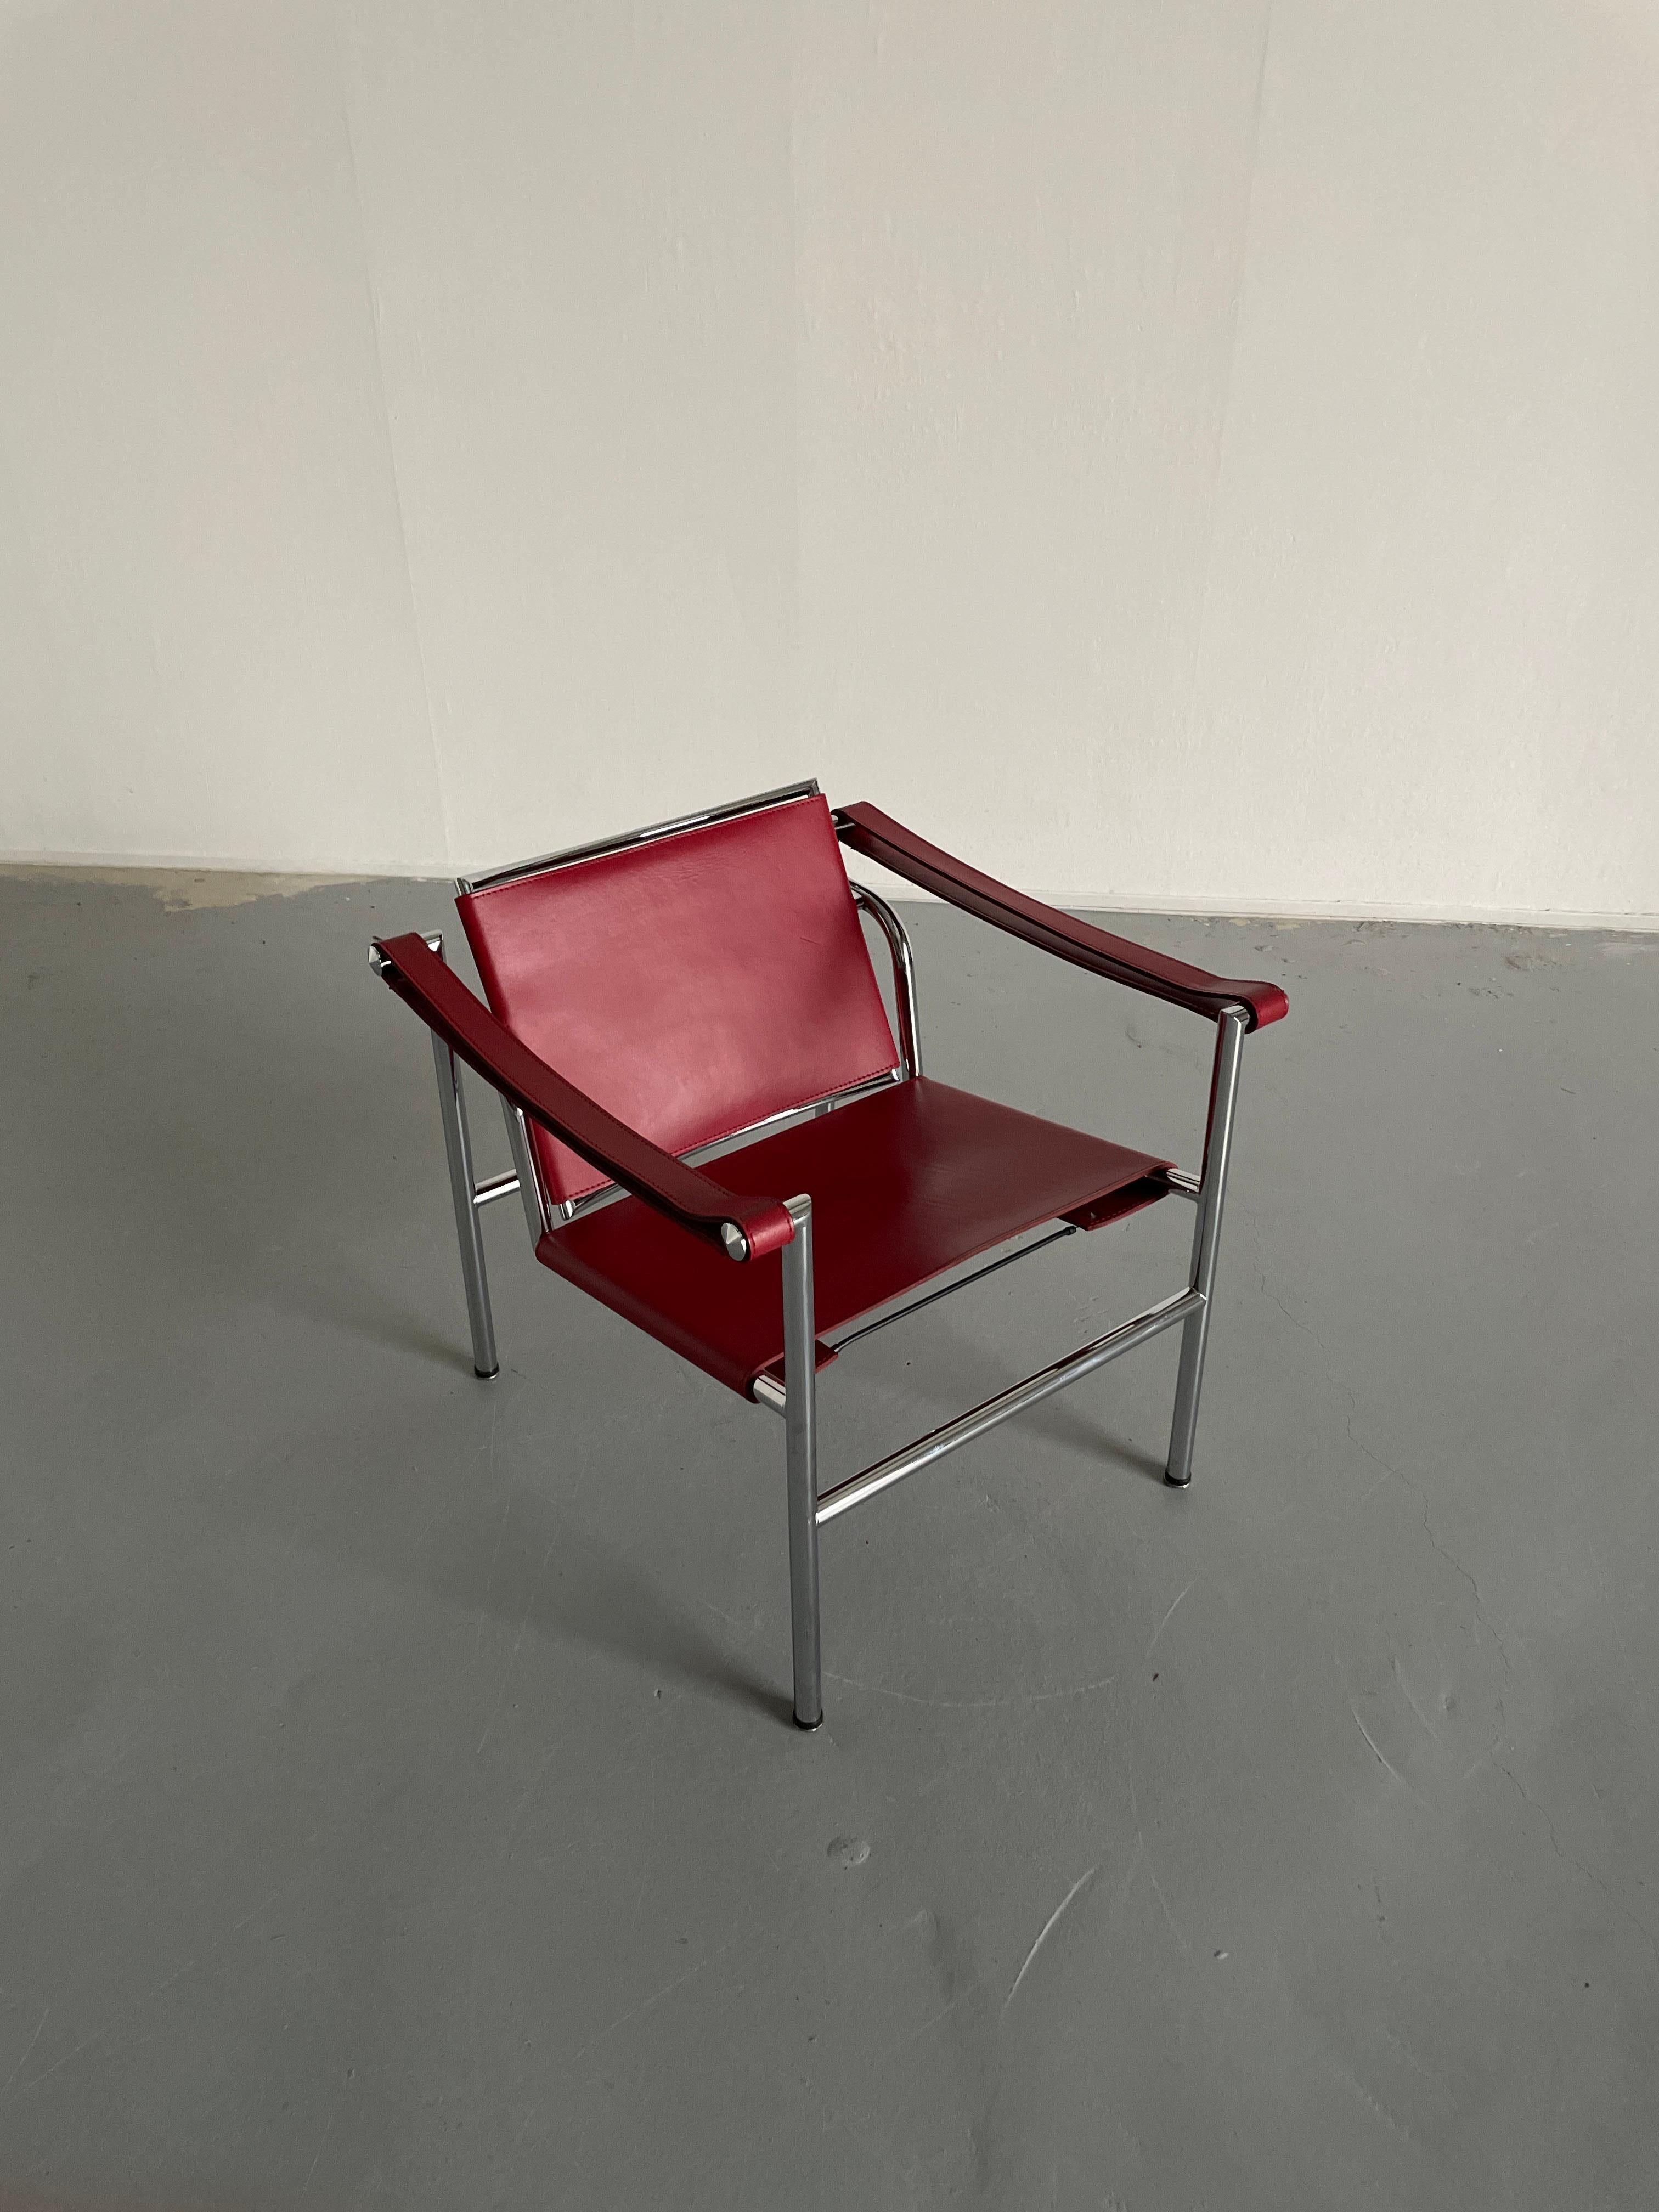 Late 20th Century Vintage Mid-Century Modern Lounge Chair in style of 'LC1' Chair, Le Corbusier